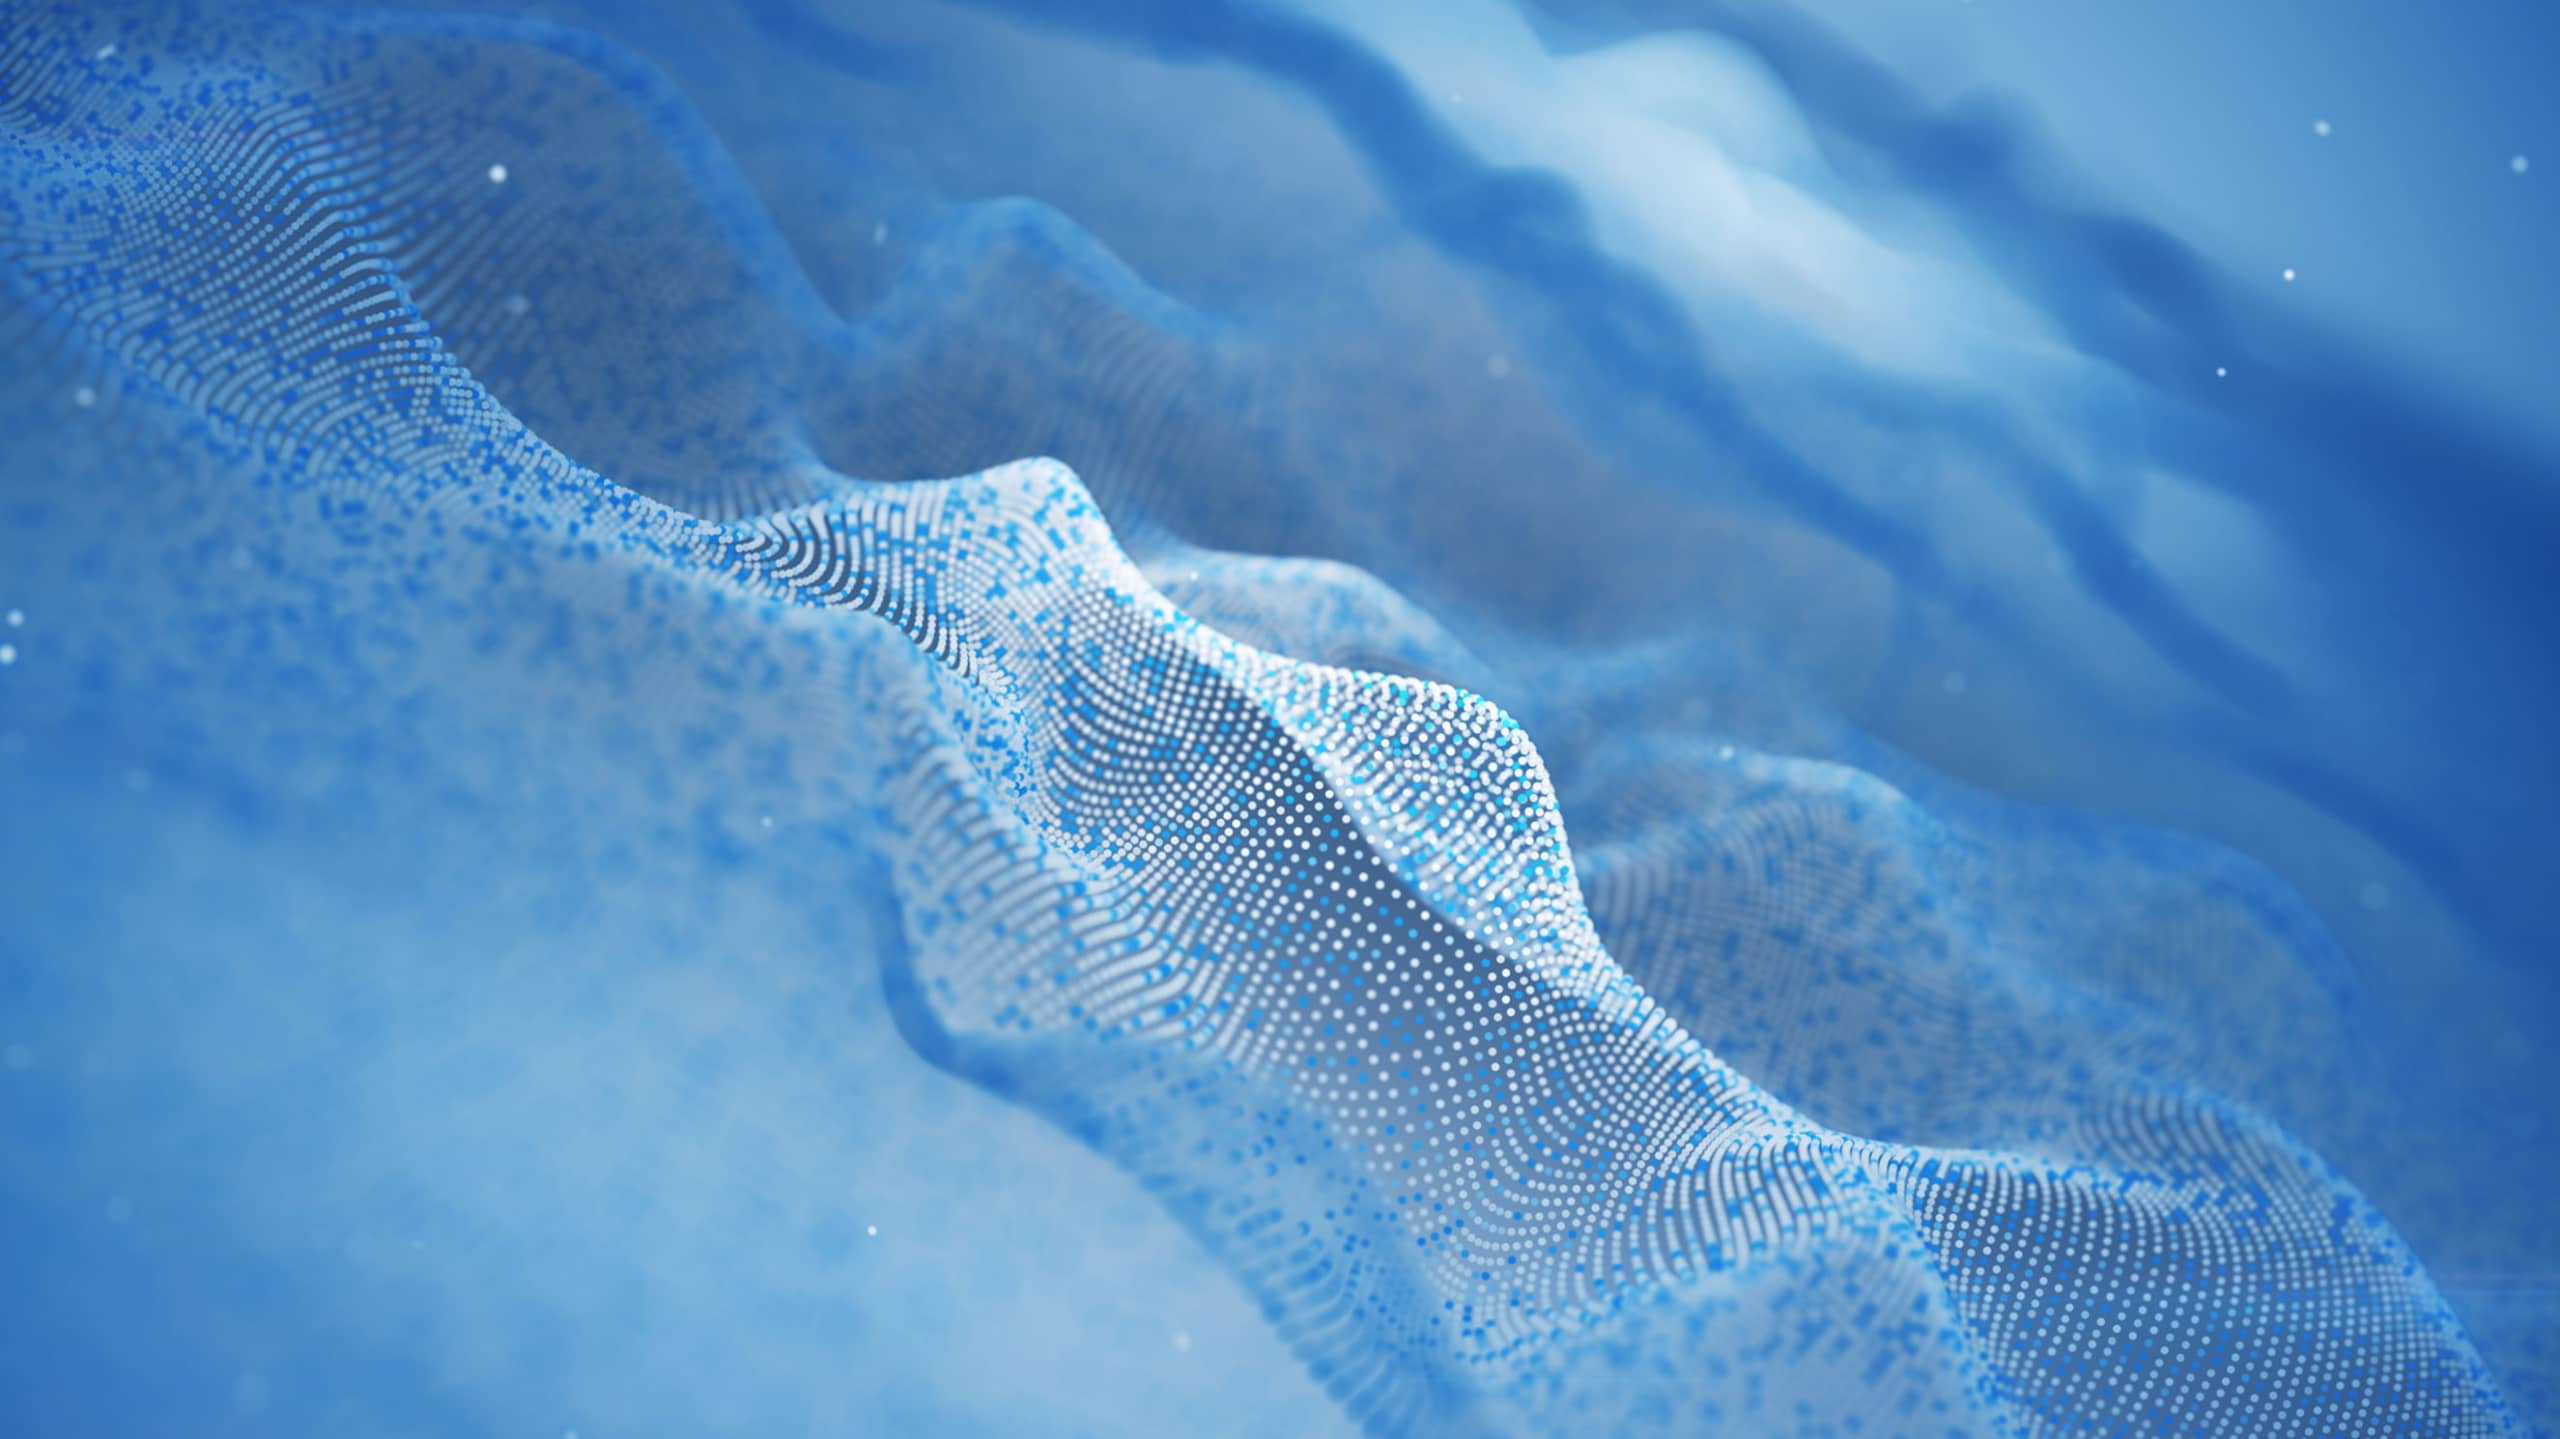 Digital representation of a wave composed of blue particles carrying arbitrary data payloads, highlighting intricate patterns and a sense of motion, set against a soft blue background.